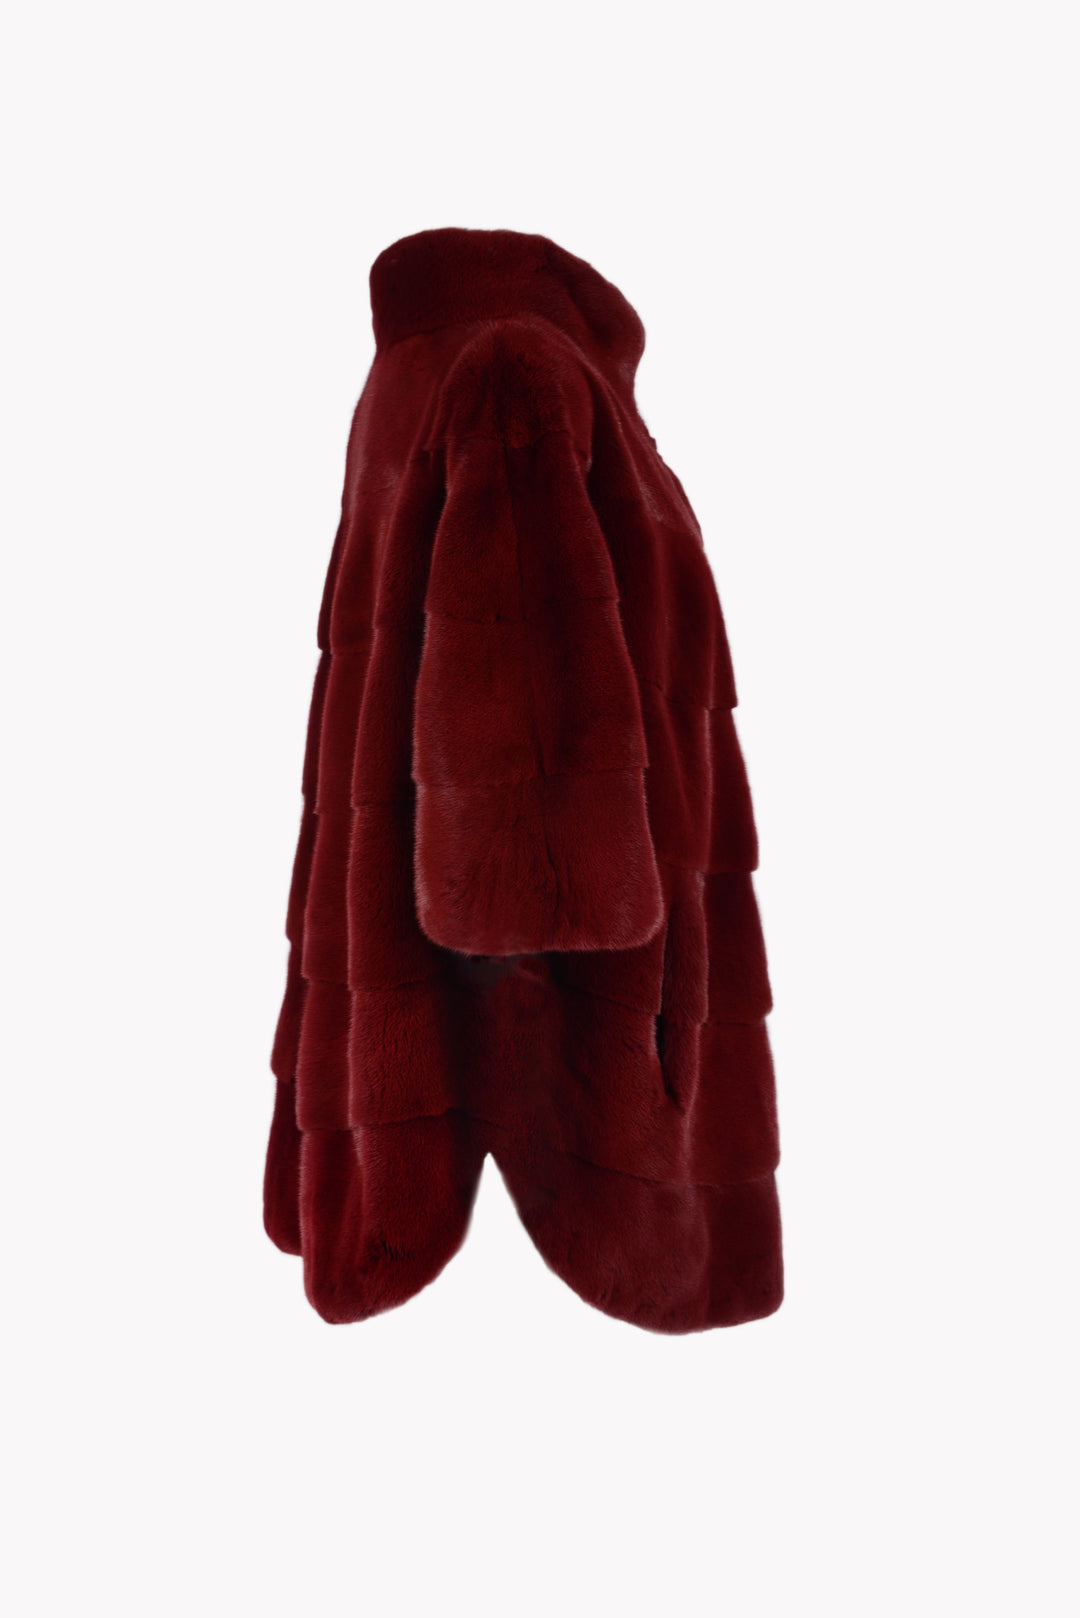 Oversize mink cape/jacket with stand up collar